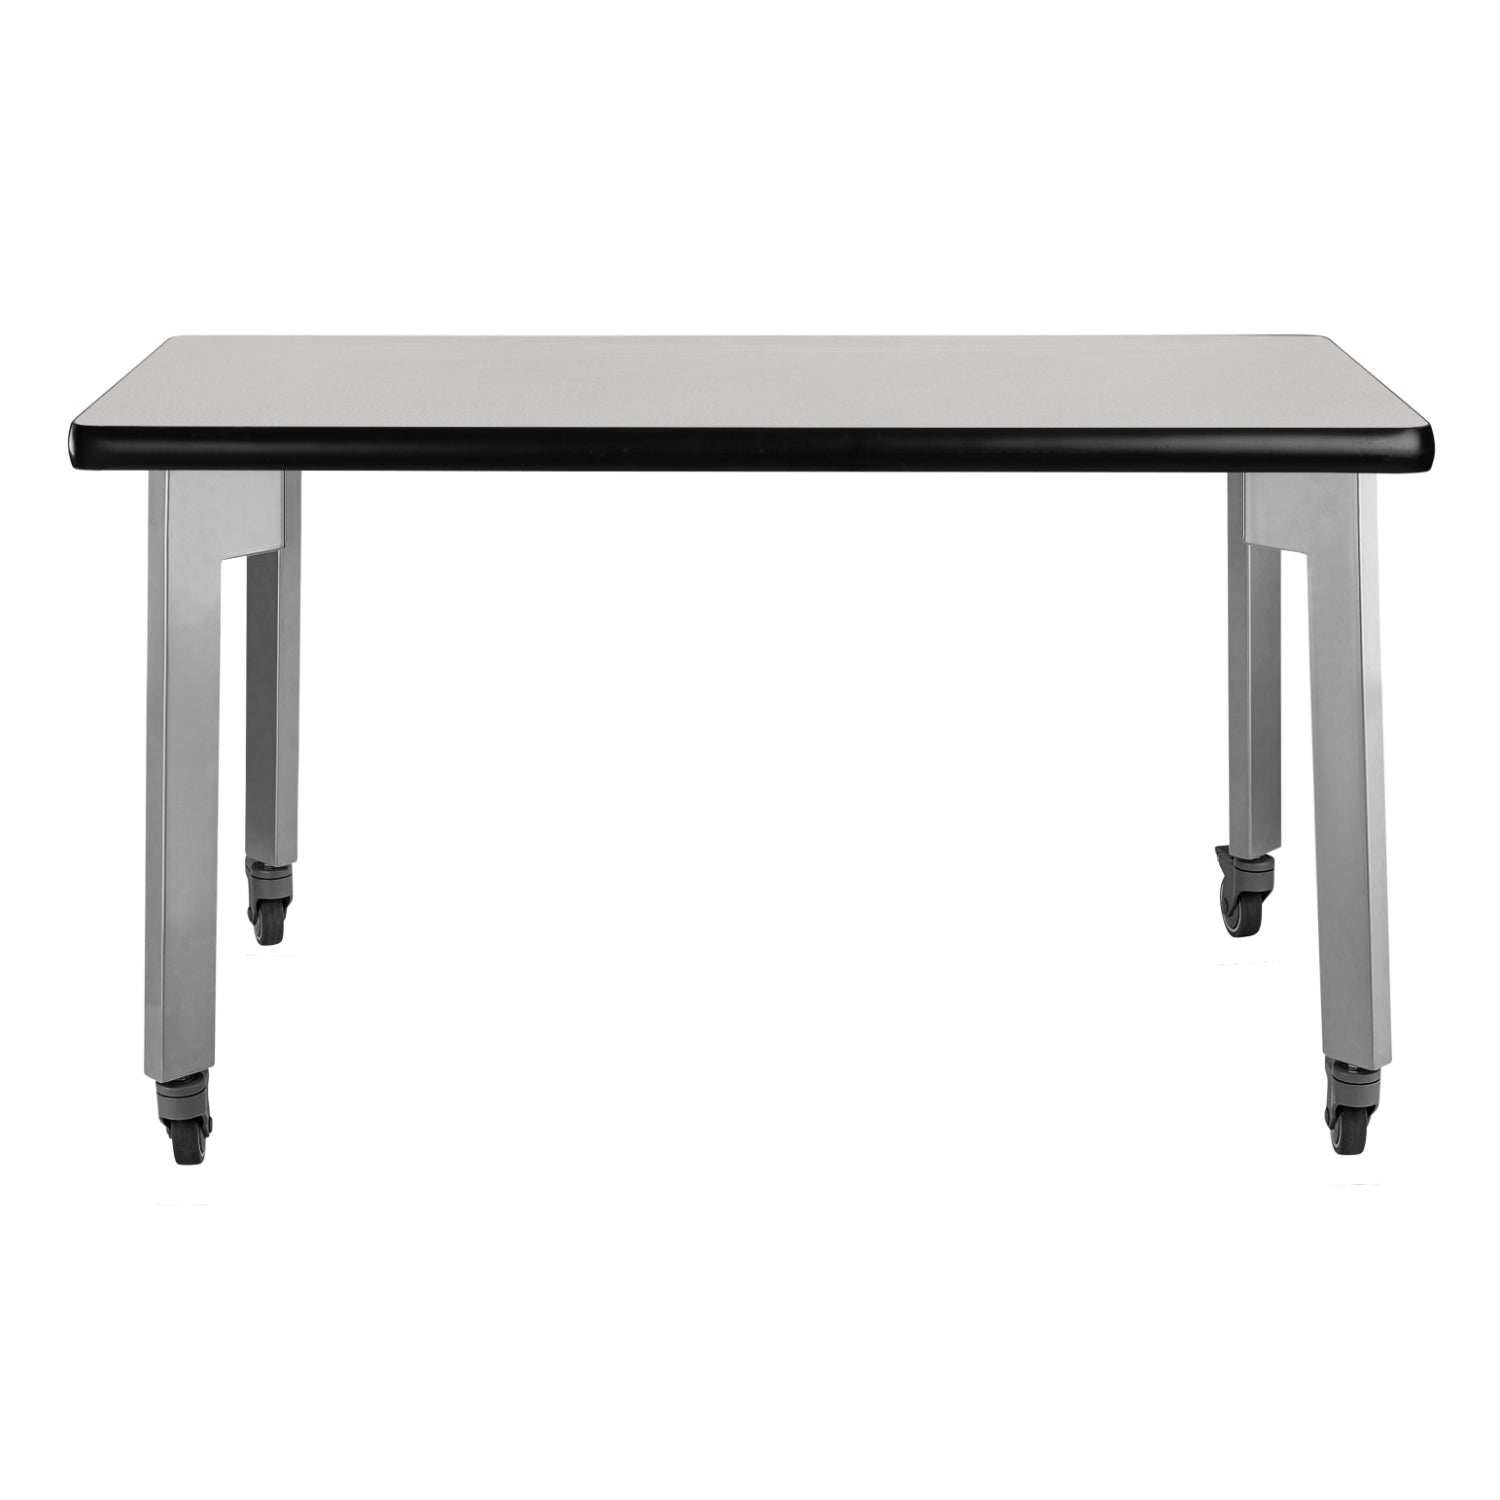 Titan Mobile Table, 24" x 60", Standard High Pressure Laminate Top with Particleboard Core and T-Mold Edge